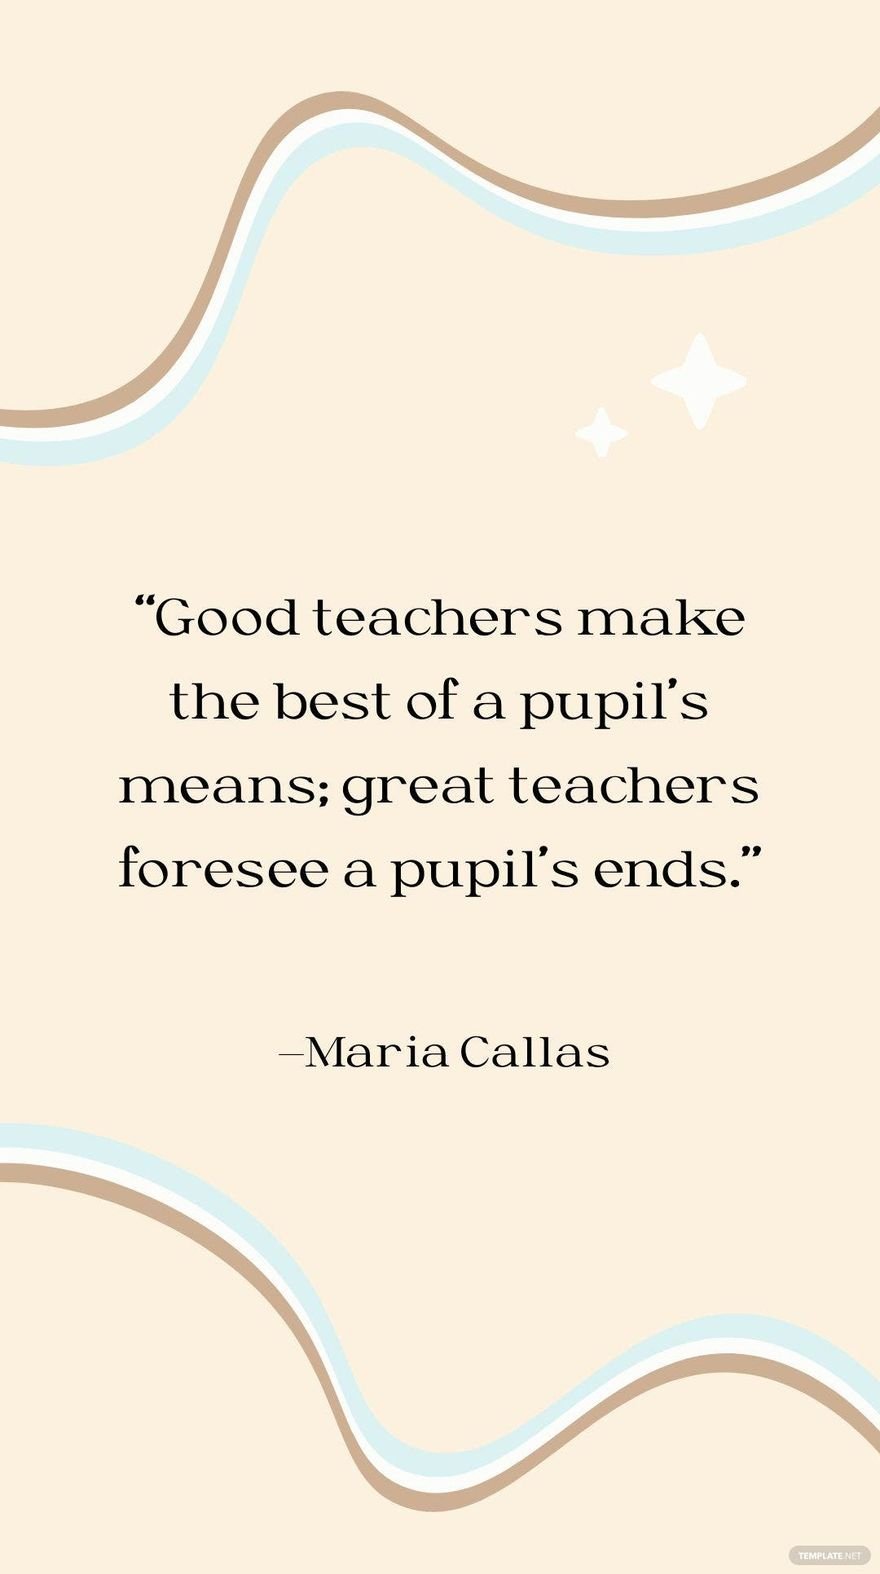 Free Maria Callas - Good teachers make the best of a pupil’s means; great teachers foresee a pupil’s ends. in JPG